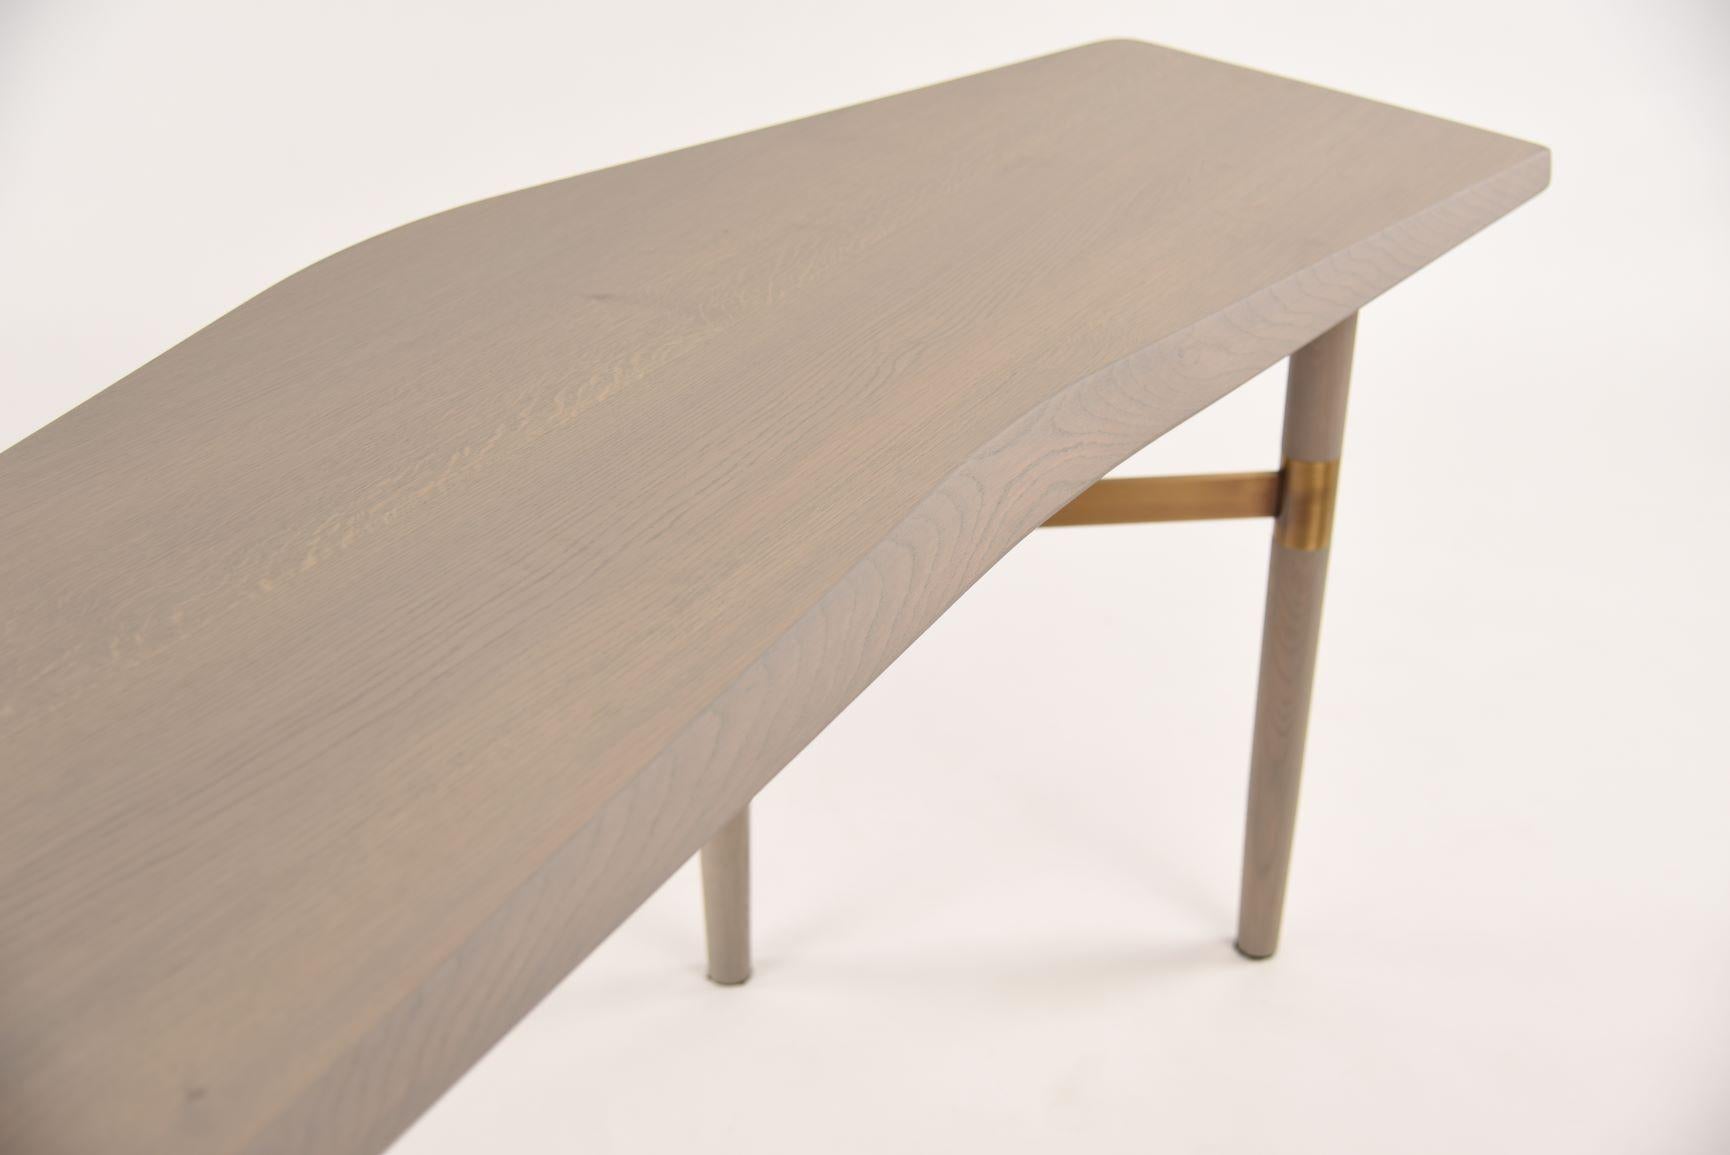 Darling Point Desk by Yabu Pushelberg in Ivory Matte Lacquered Oak and Brass In New Condition For Sale In Toronto, ON